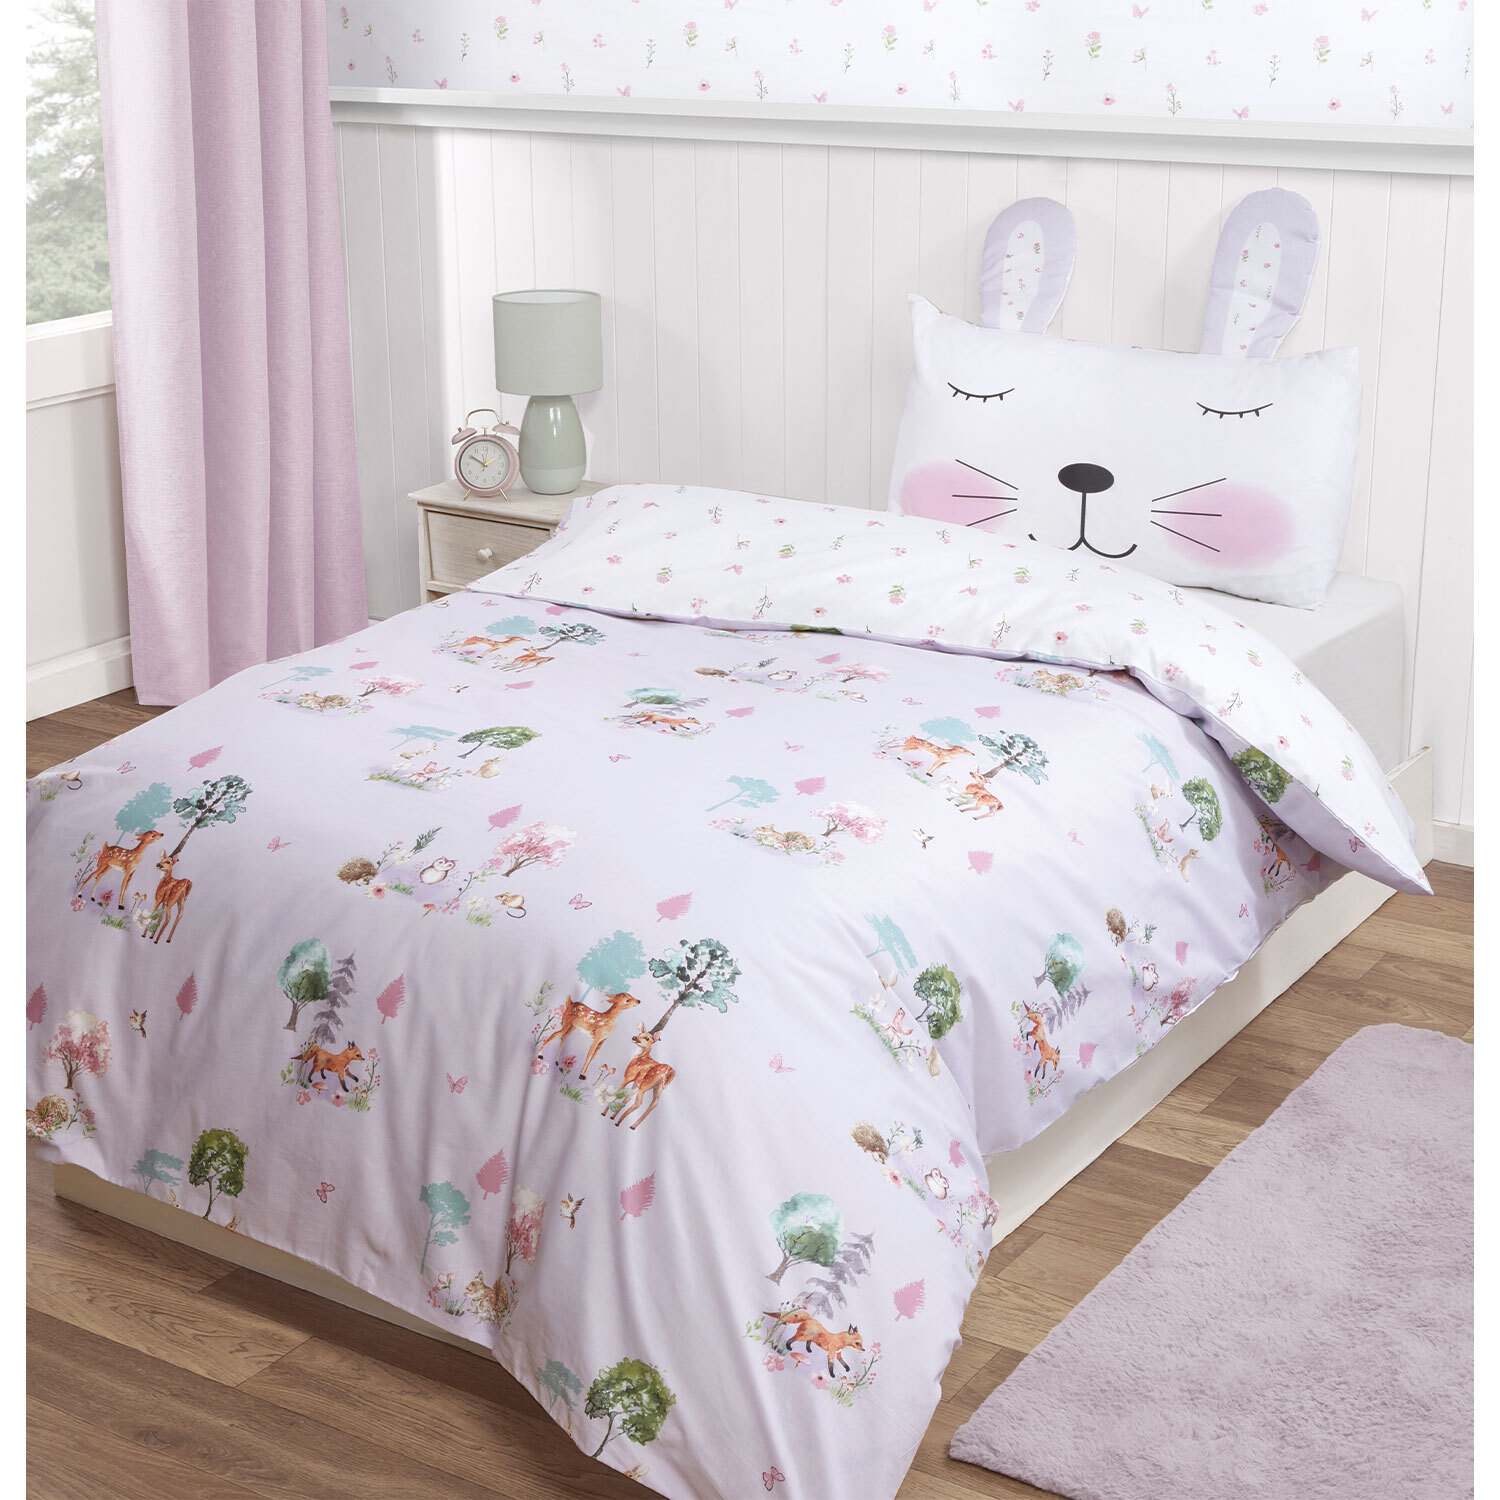 Kid's Single Enchanted Forest Duvet and Pillowcase Set Image 1